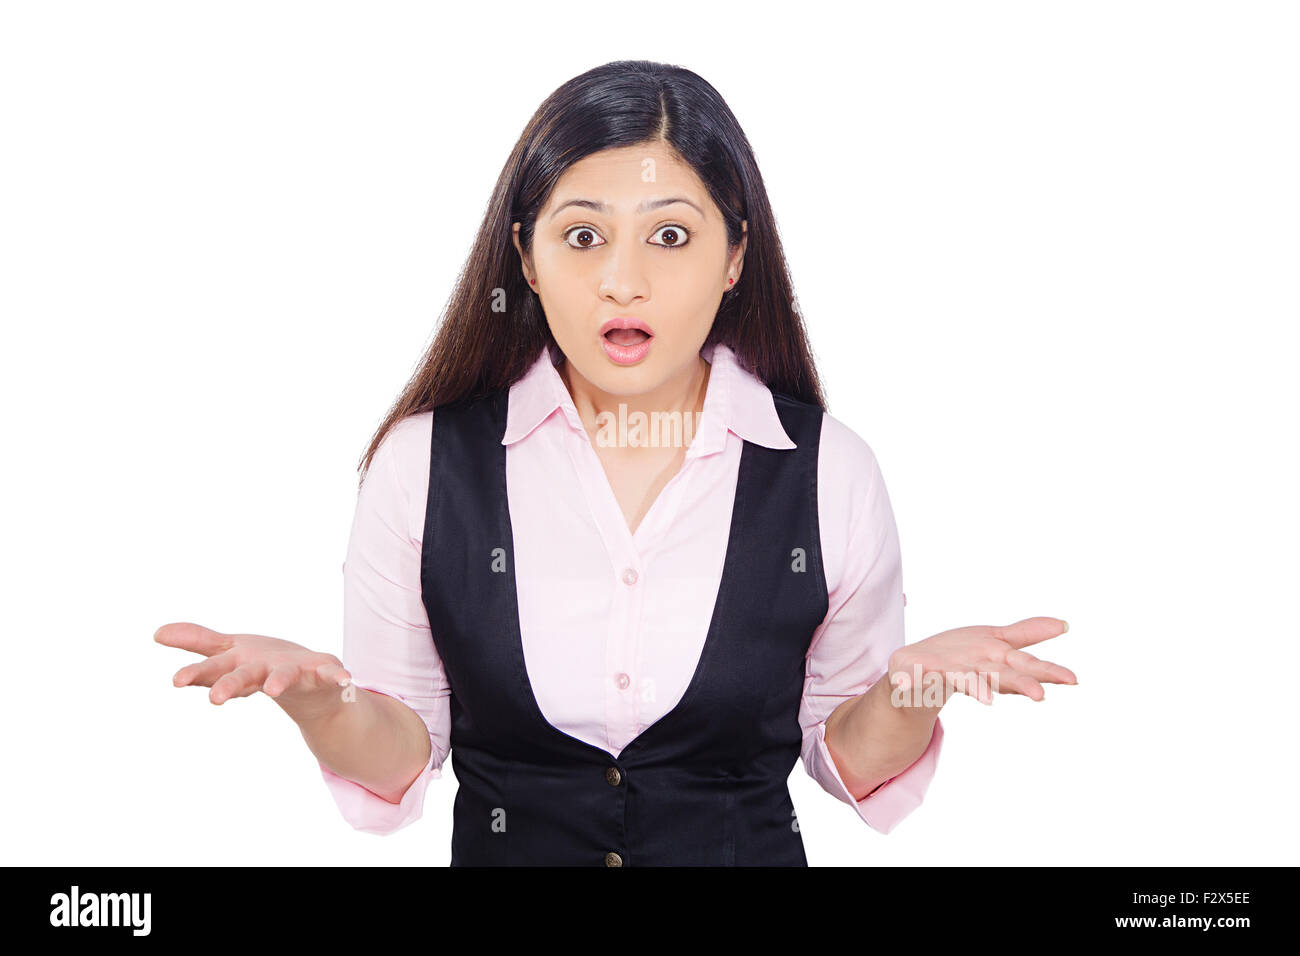 1 indian Business donna terribile problema Foto Stock